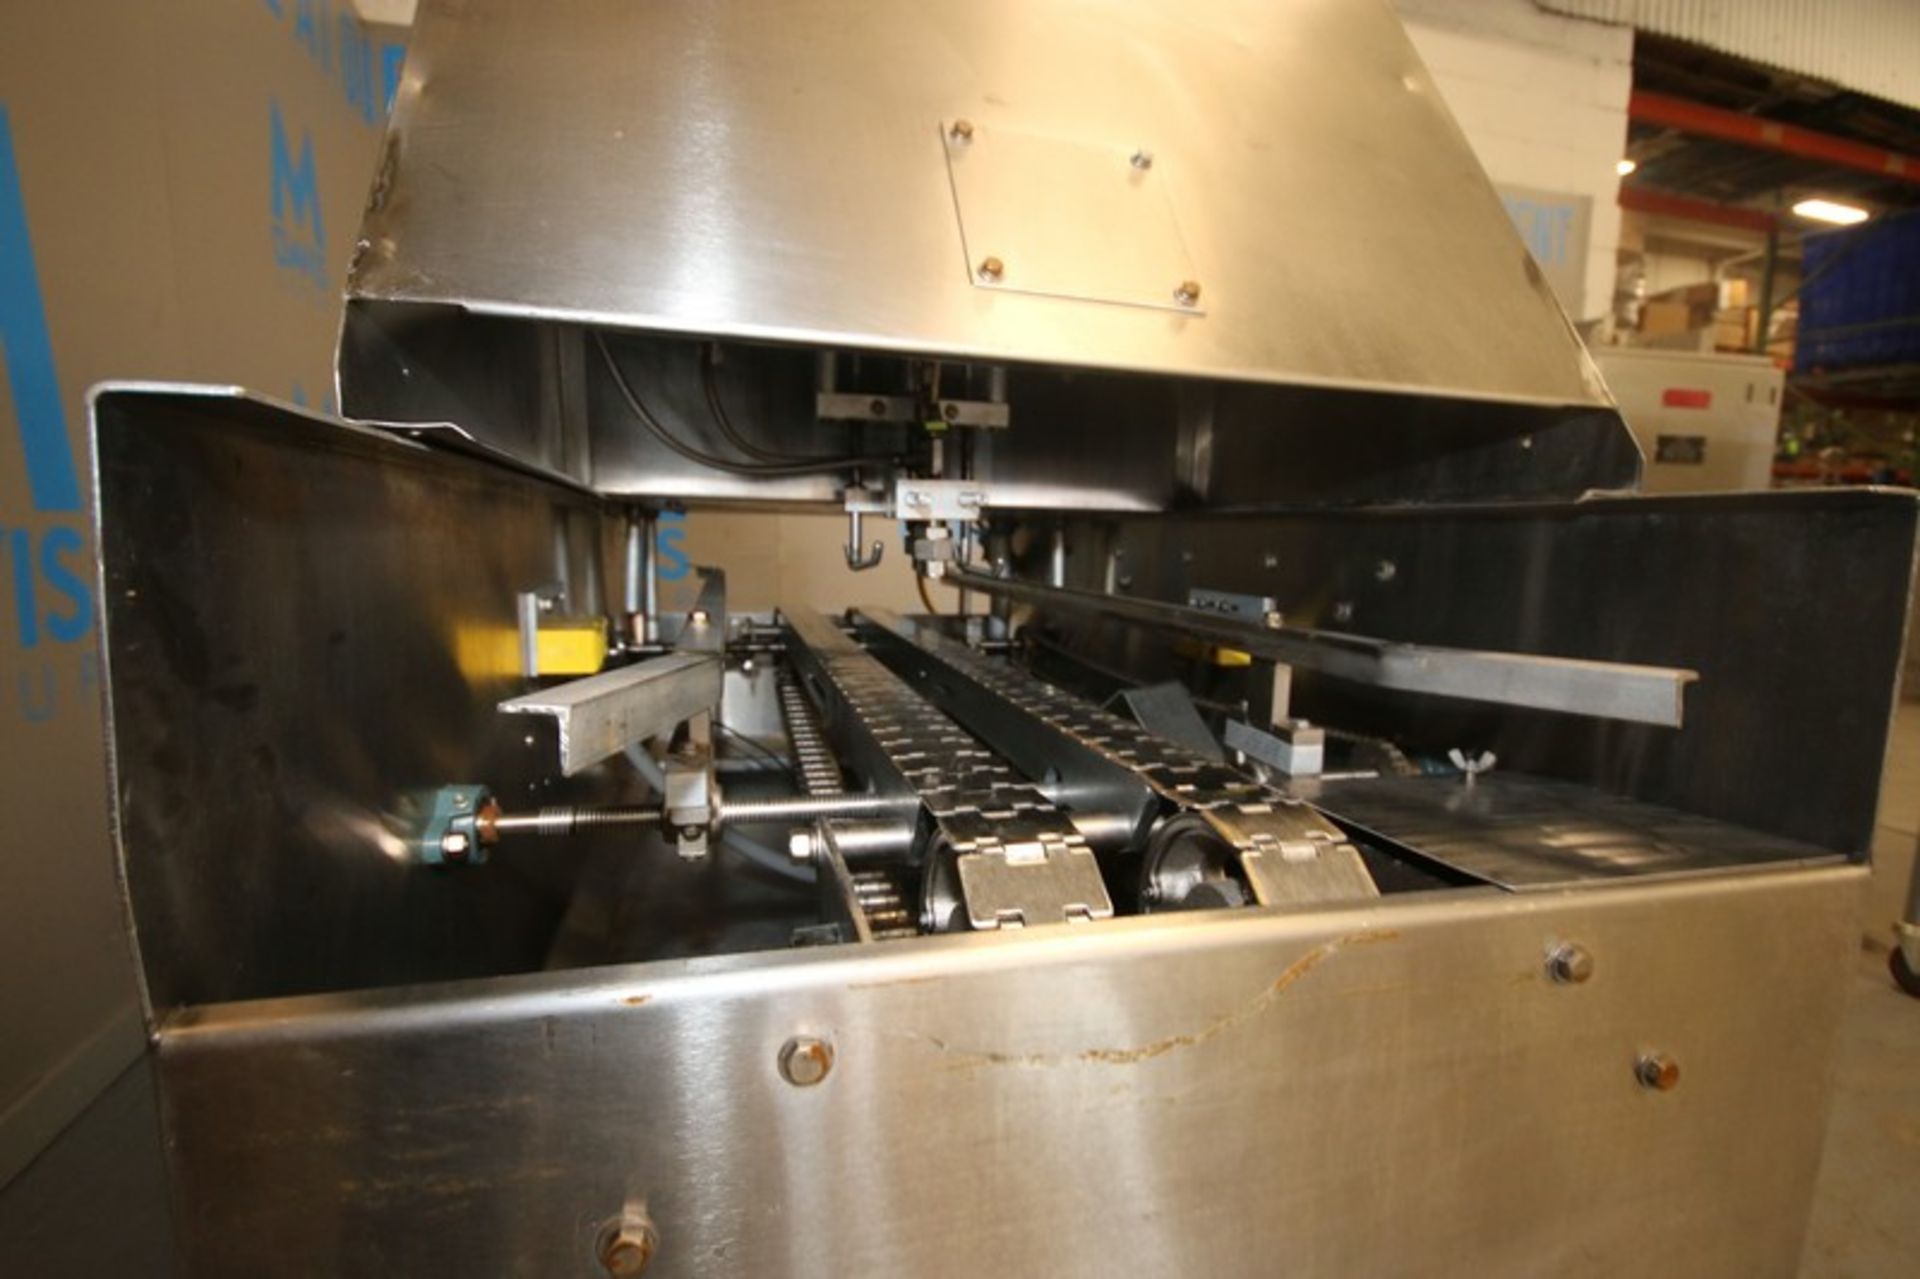 Mallet S/S Bread Pan Oiler, M/N 01A, S/N 242-456, 460 Volts, 3 Phase, Mounted on Portable Frame ( - Image 11 of 15